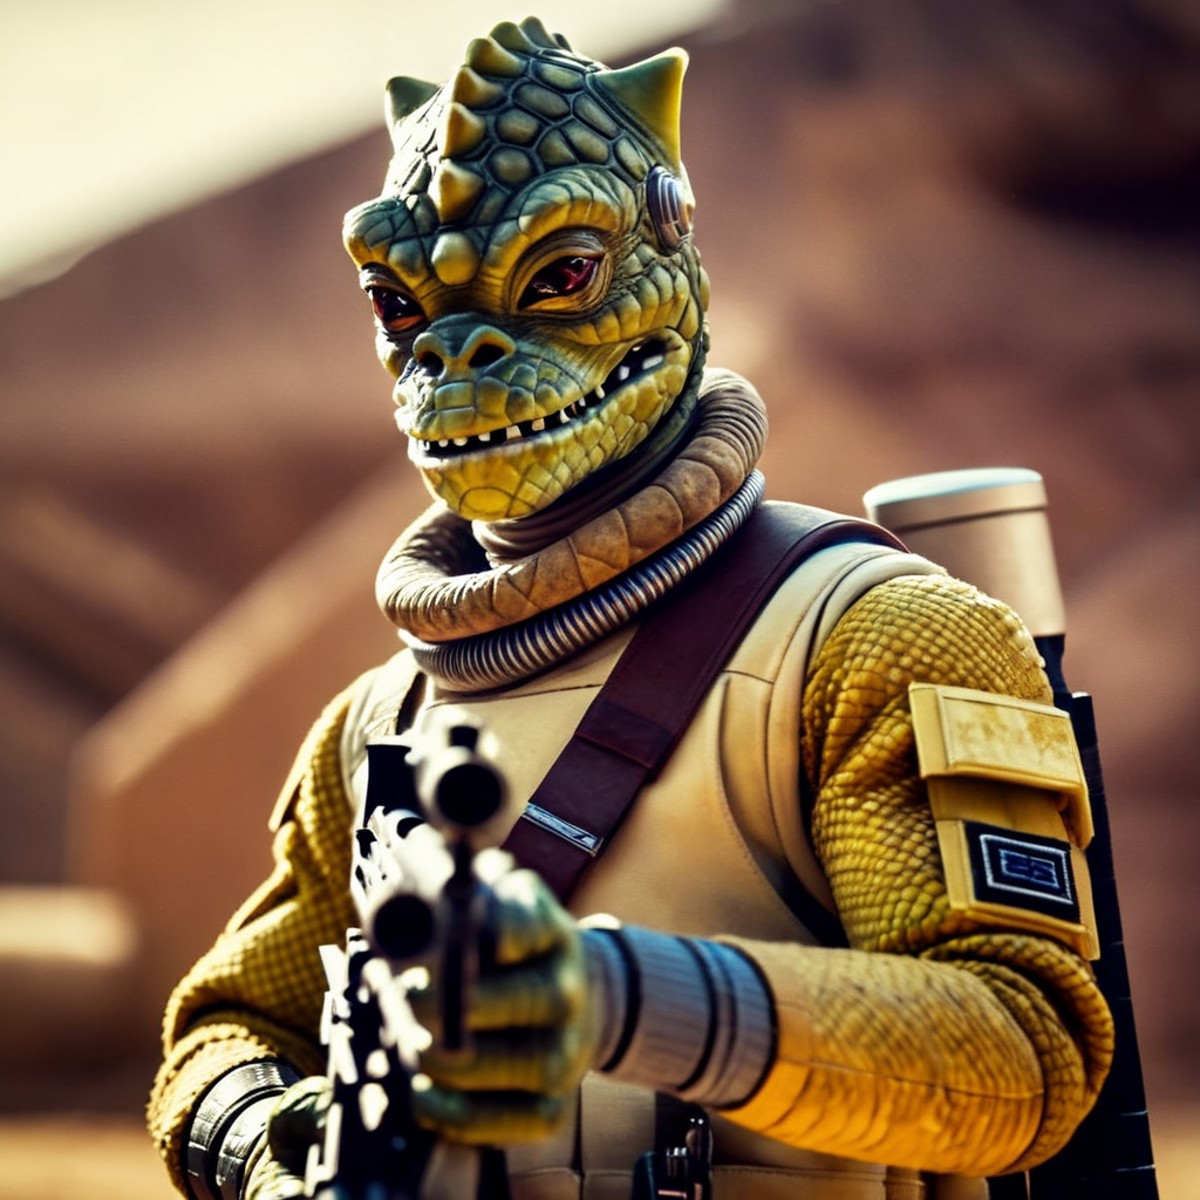 cinematic film still of  <lora:Bossk:1.2>
Bossk a reptilian cartoon character with a gun and a helmet in star wars univers...